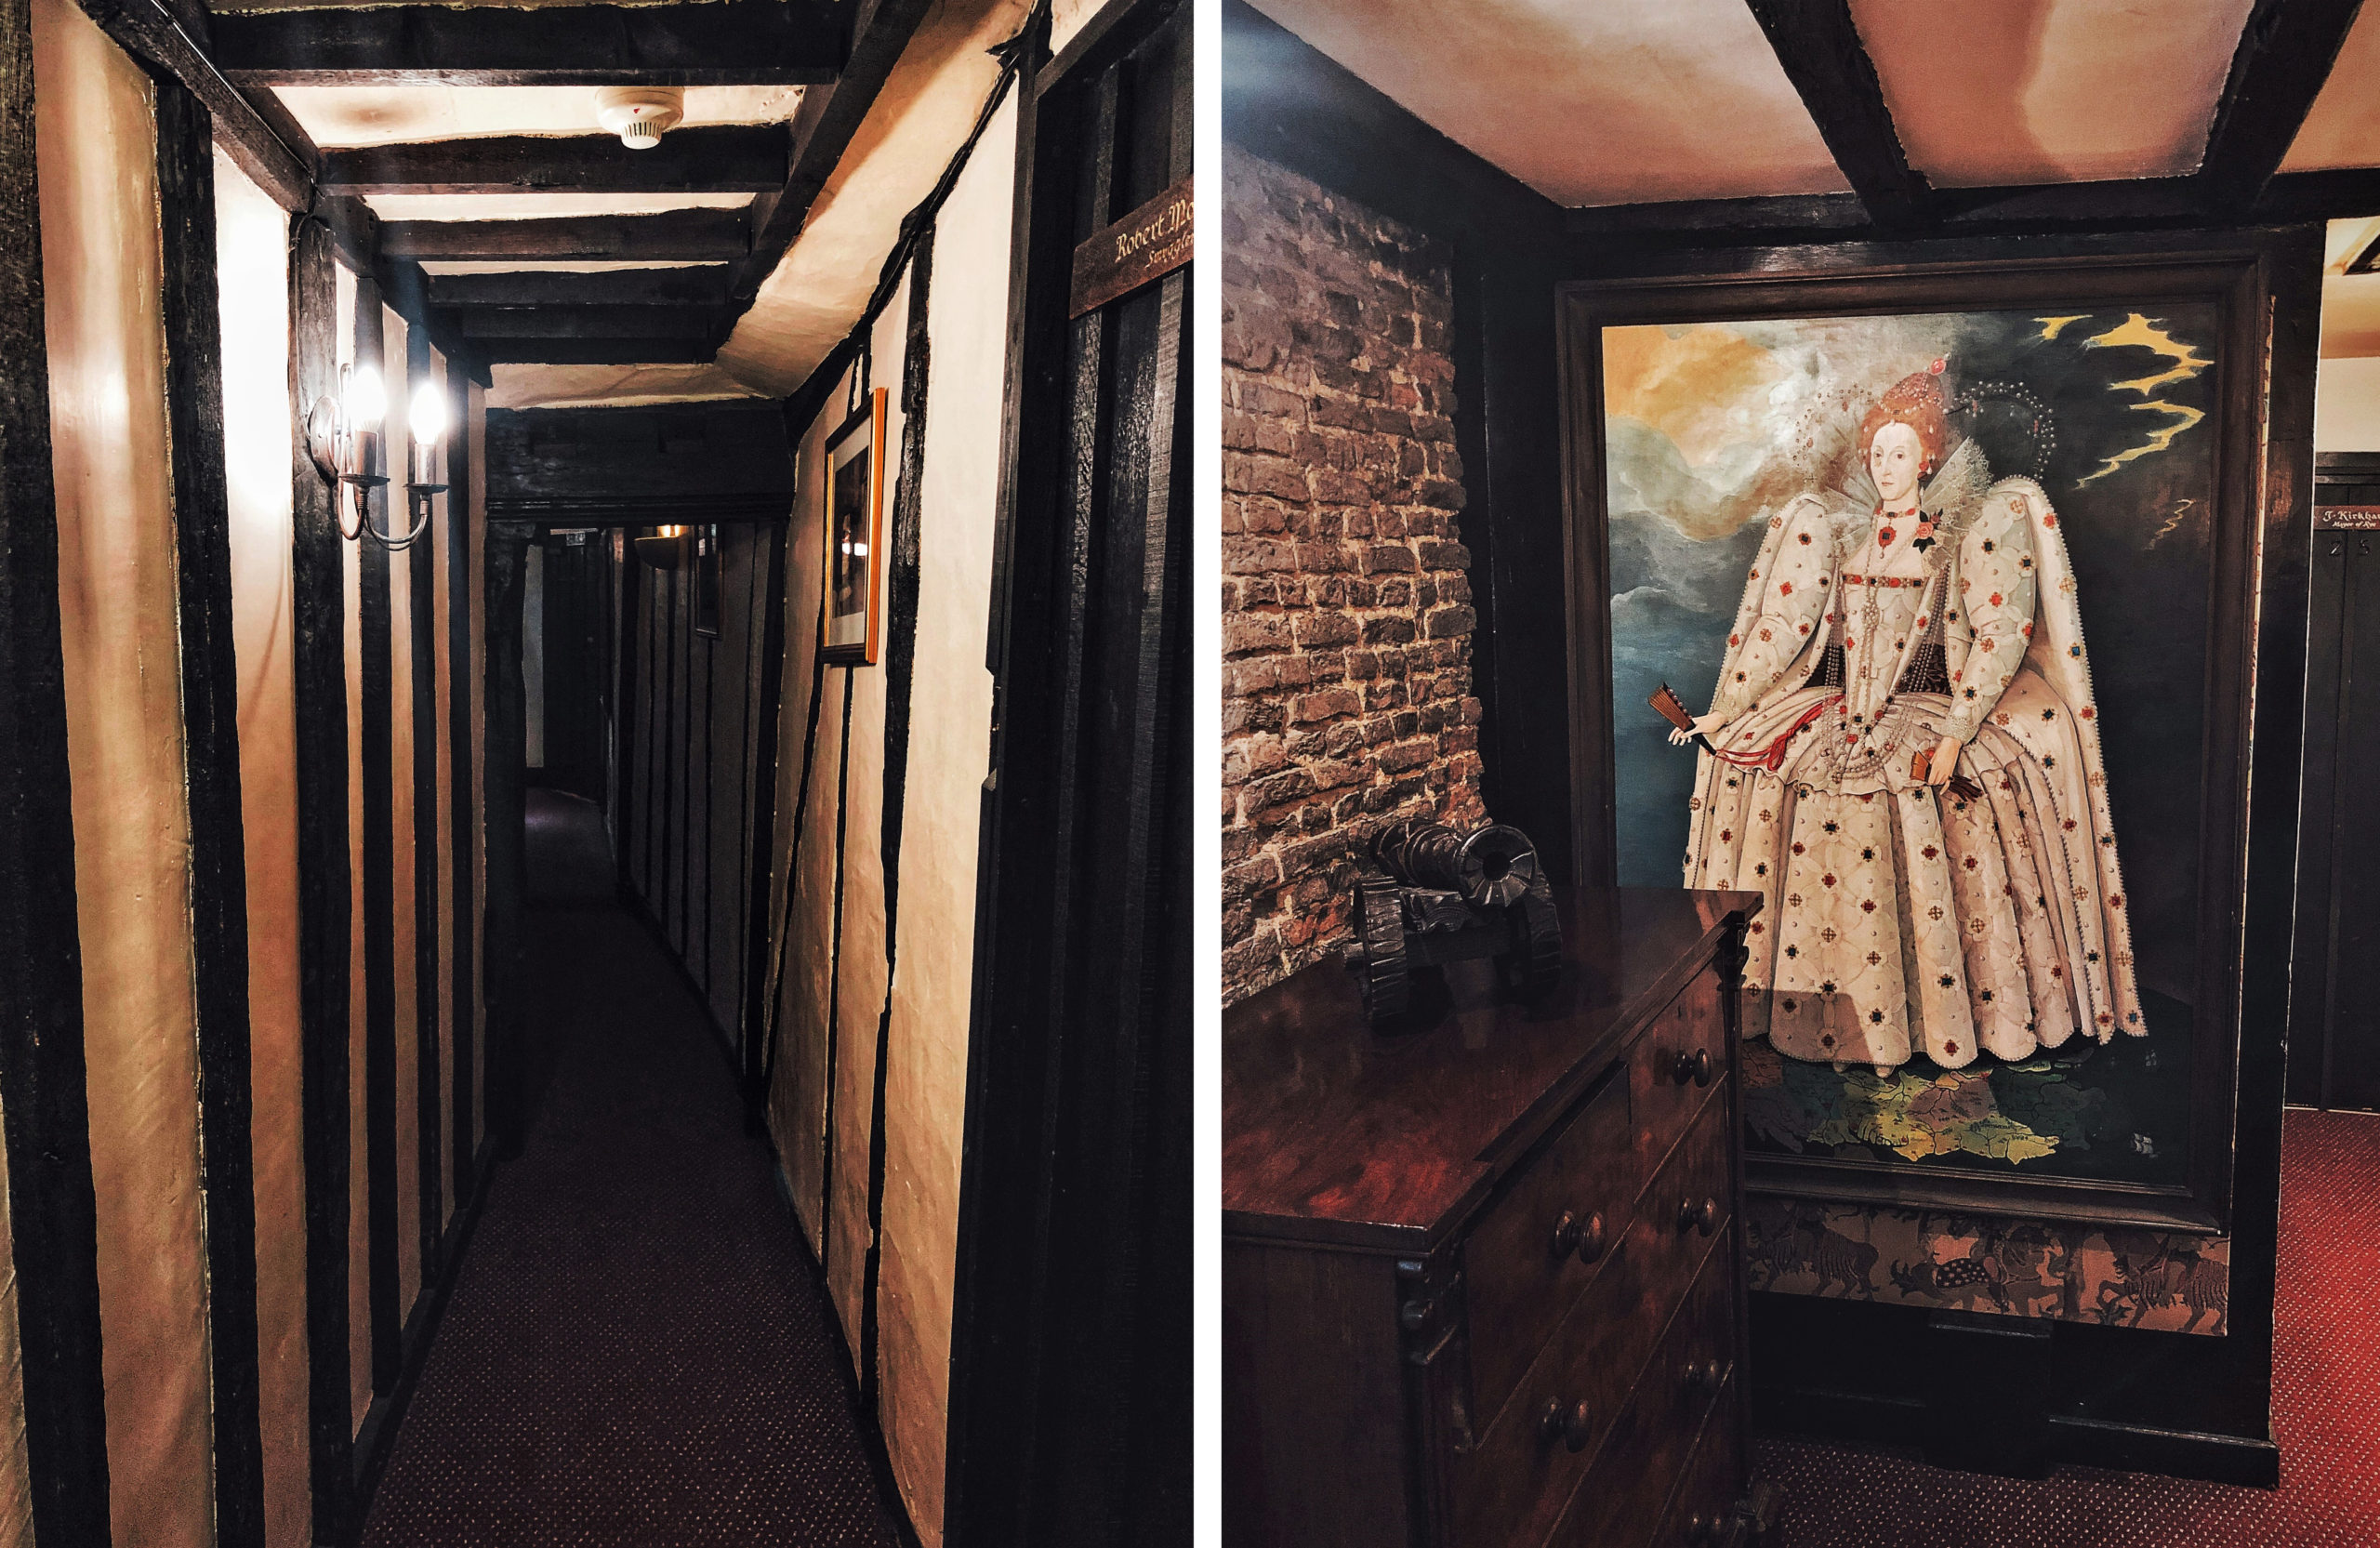 I spent the night at the most haunted hotel in the UK - check out these bone-chilling ghost stories from the Mermaid Inn!| haunted hotels UK | haunted locations | paranormal | places to see in the UK | quirky hotels | UK hotels | UK travel | unique hotels | where to stay in the UK | UK weekend ideas | places to see near London | haunted England | ghost stories | ghost sightings | unusual places to stay in the UK | Rye | Mermaid Street | spooky | trips from London | #haunted #travel #ukhotels 